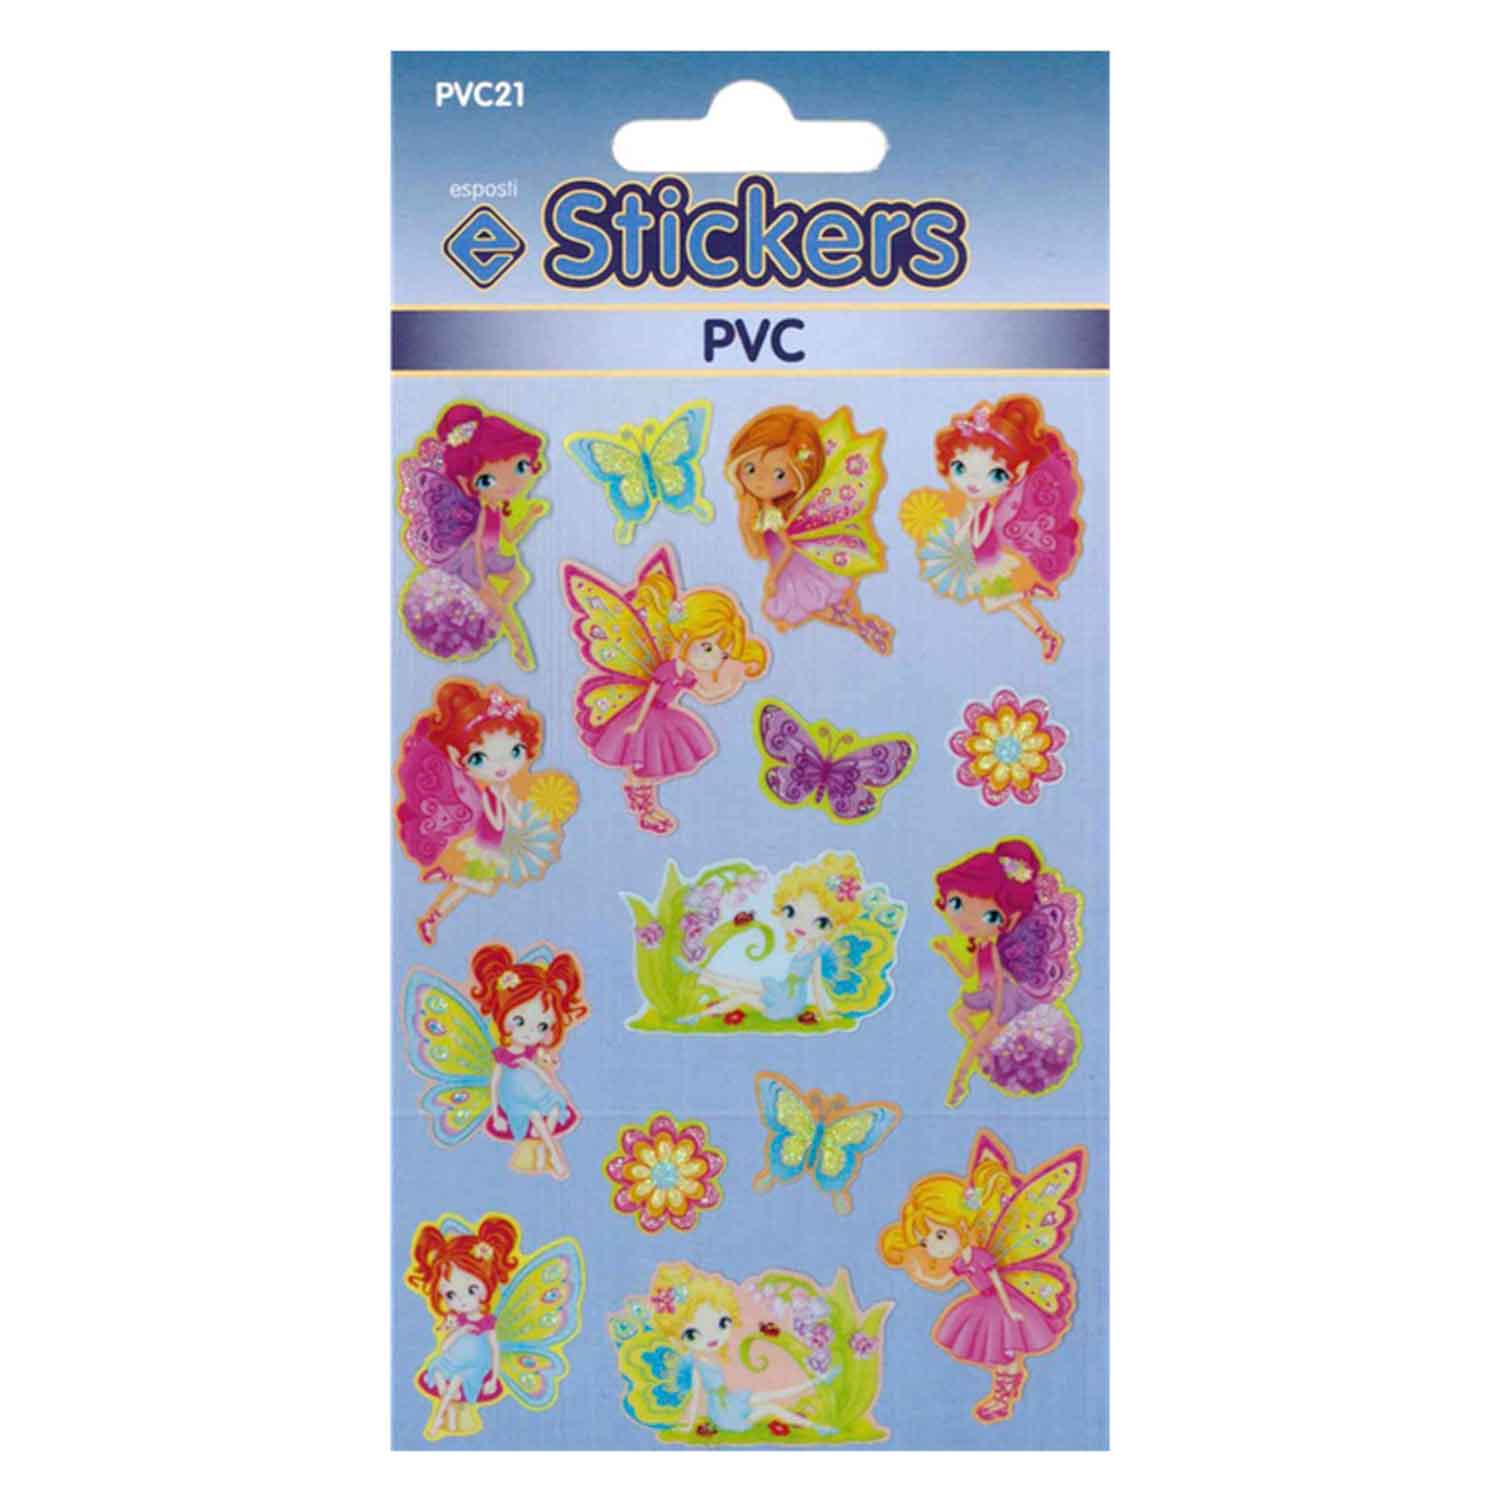 Fairies Self Adhesive PVC Novelty Stickers - Pack of 10